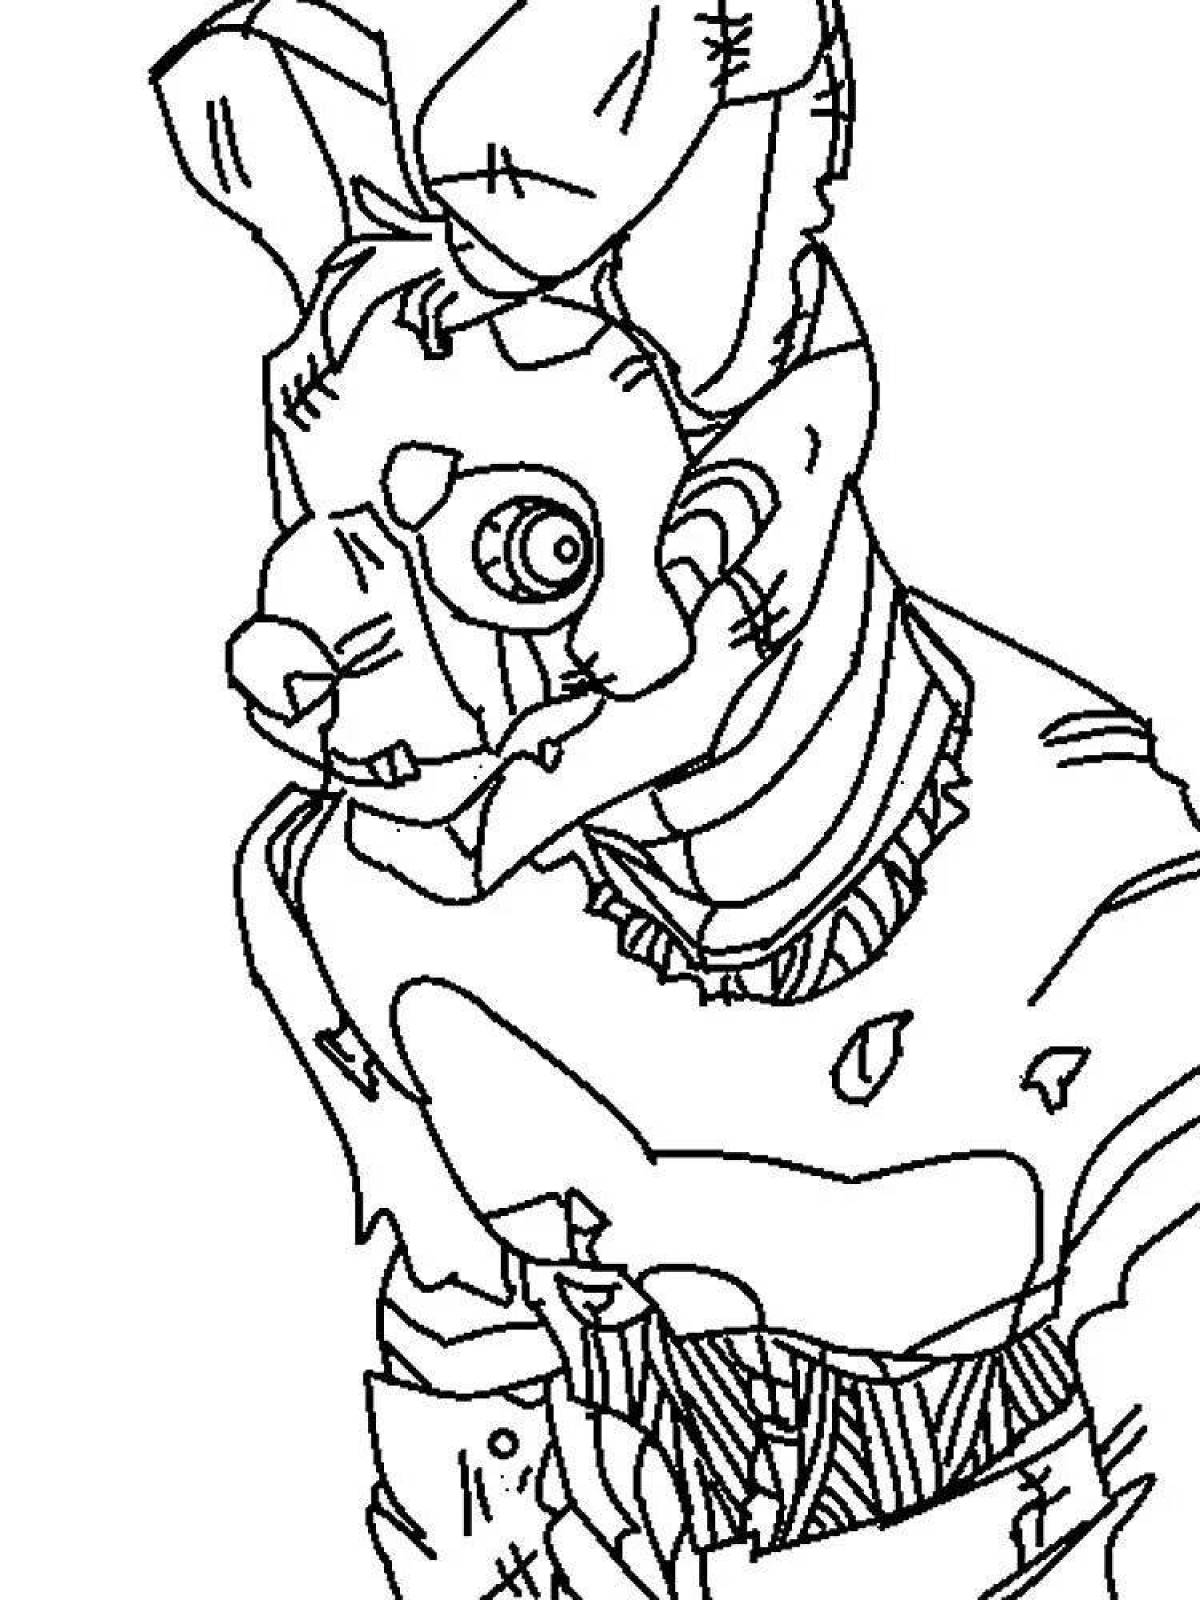 Springtrap holiday coloring page